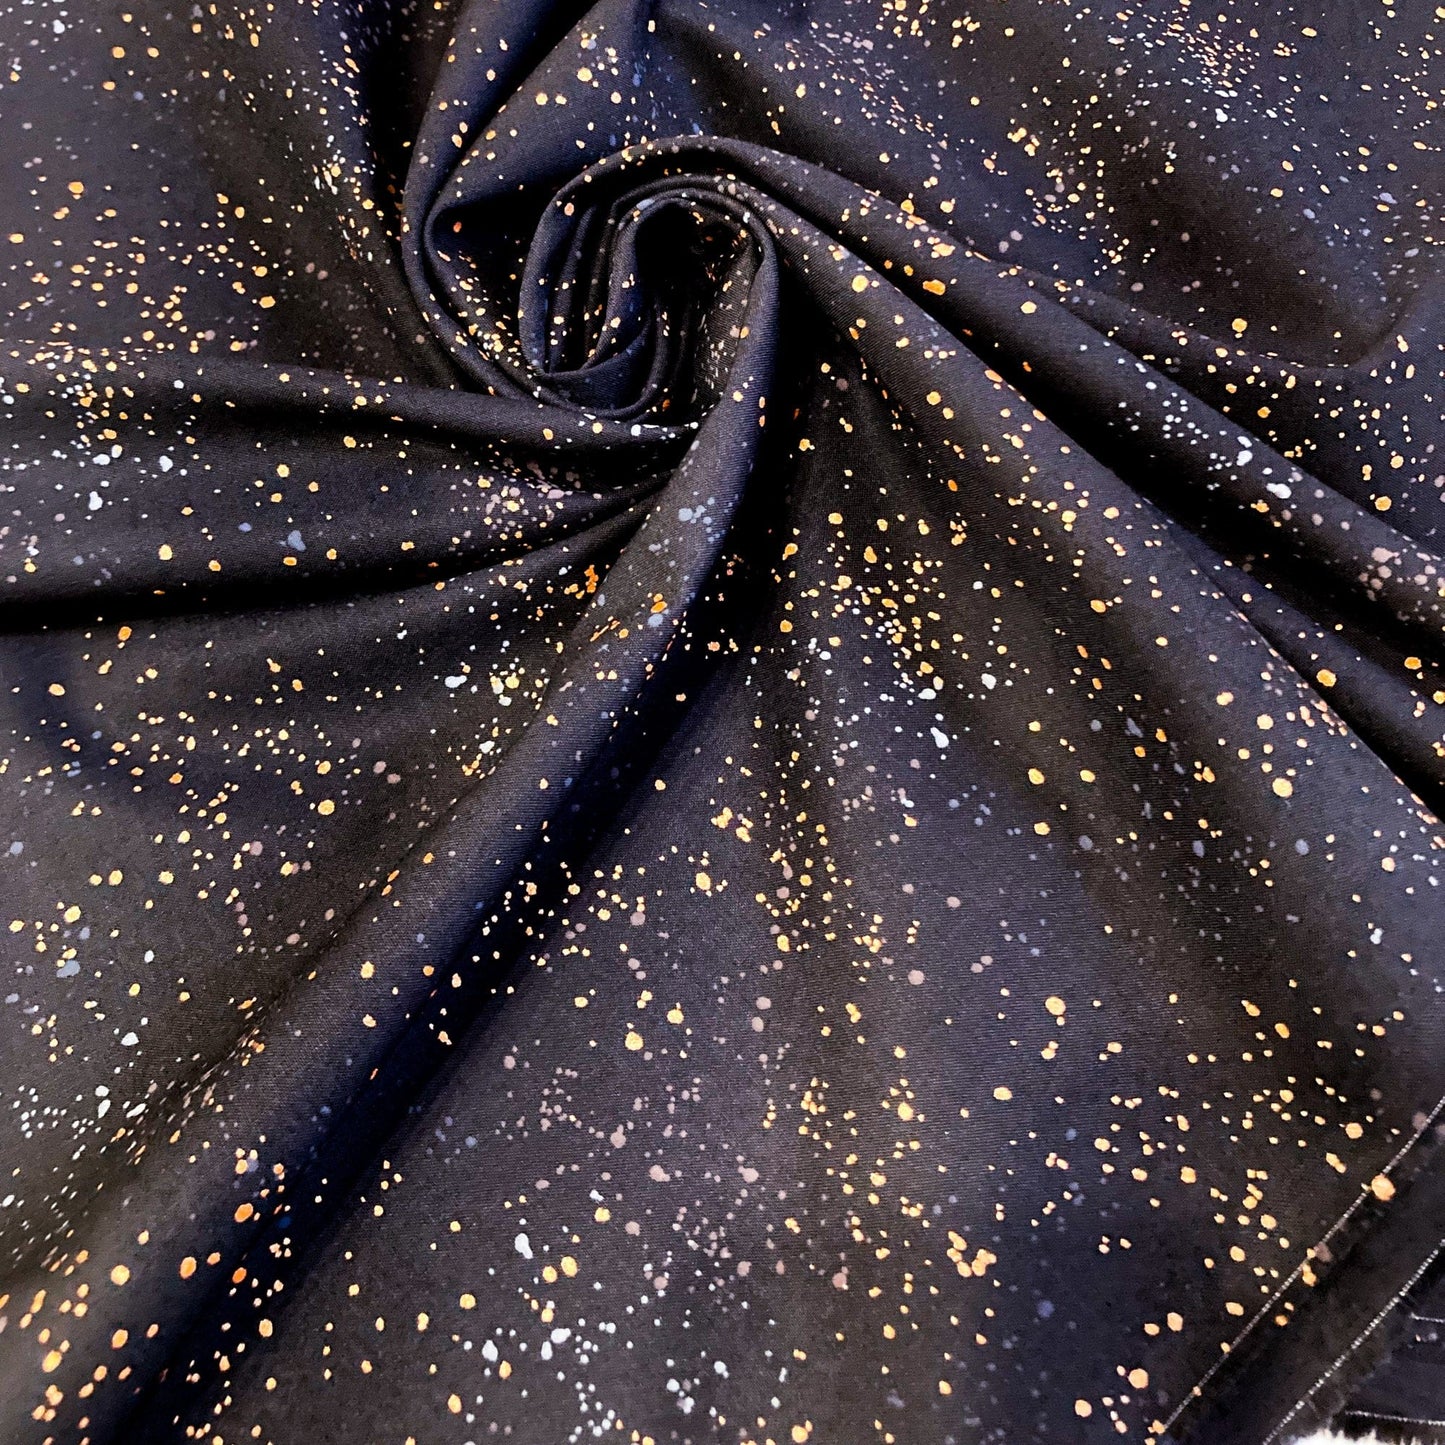 Ruby Star Society 'Speckled' Quilting Cotton in 'Black' (Metallic)